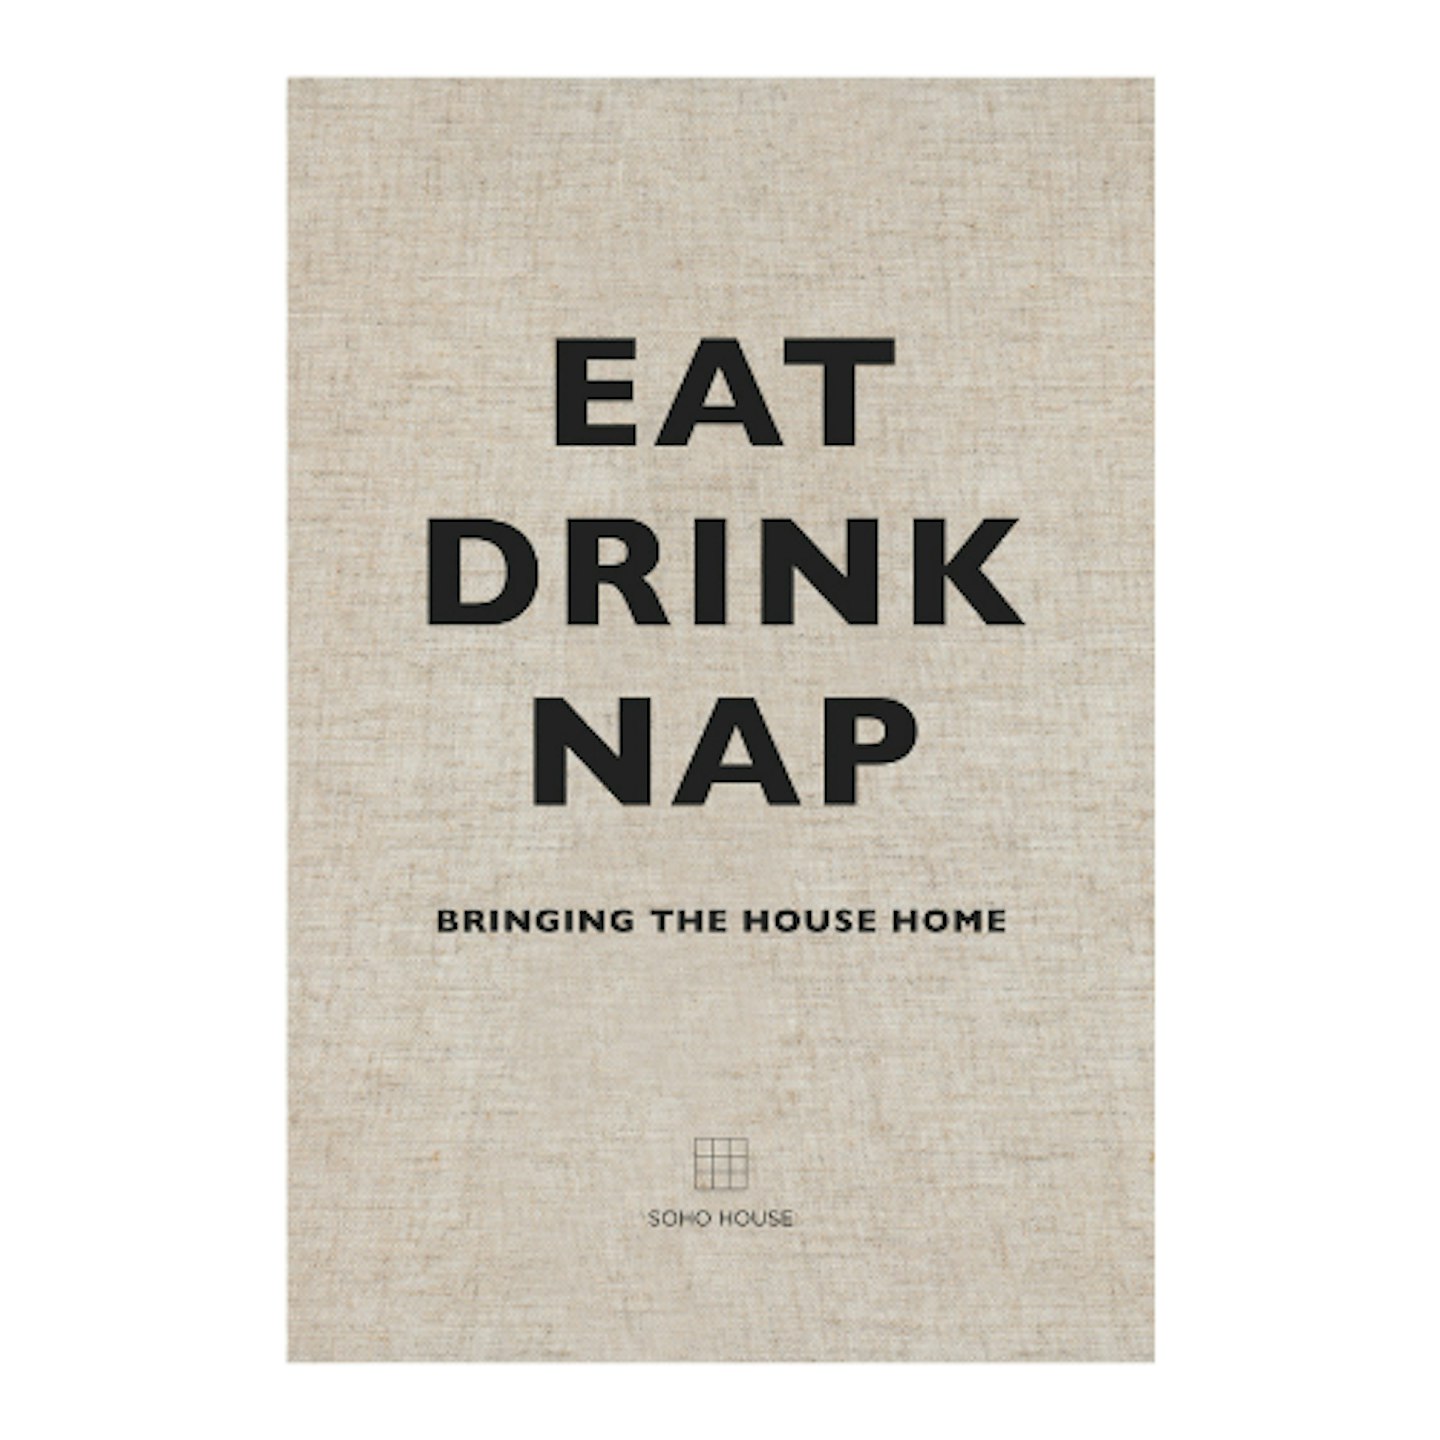 Eat, Drink, Nap: Bringing the House Home on white background